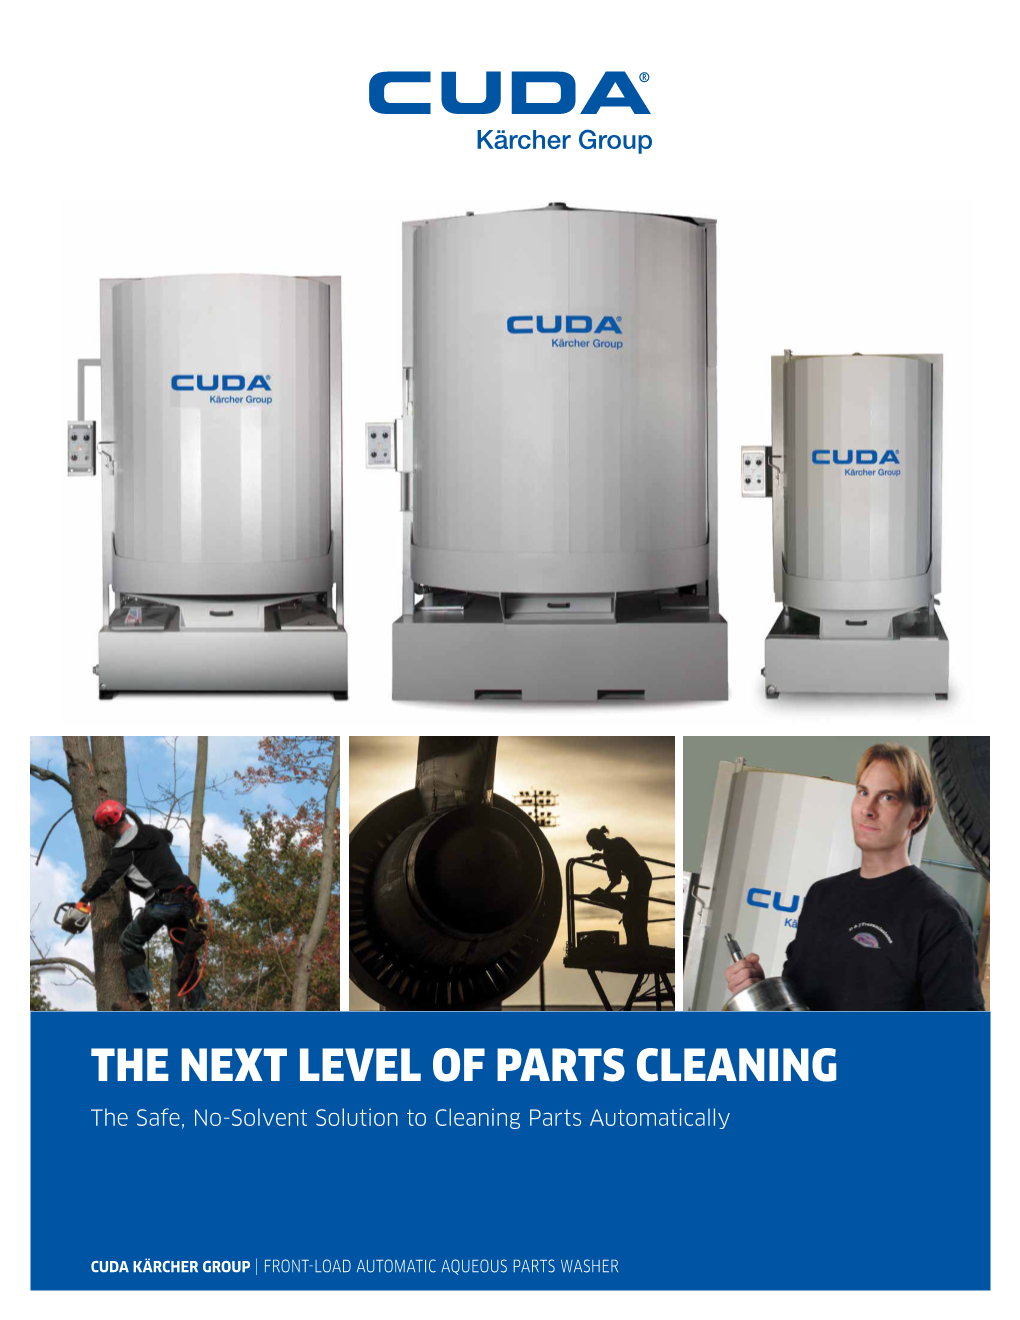 THE NEXT LEVEL of PARTS CLEANING the Safe, No-Solvent Solution to Cleaning Parts Automatically